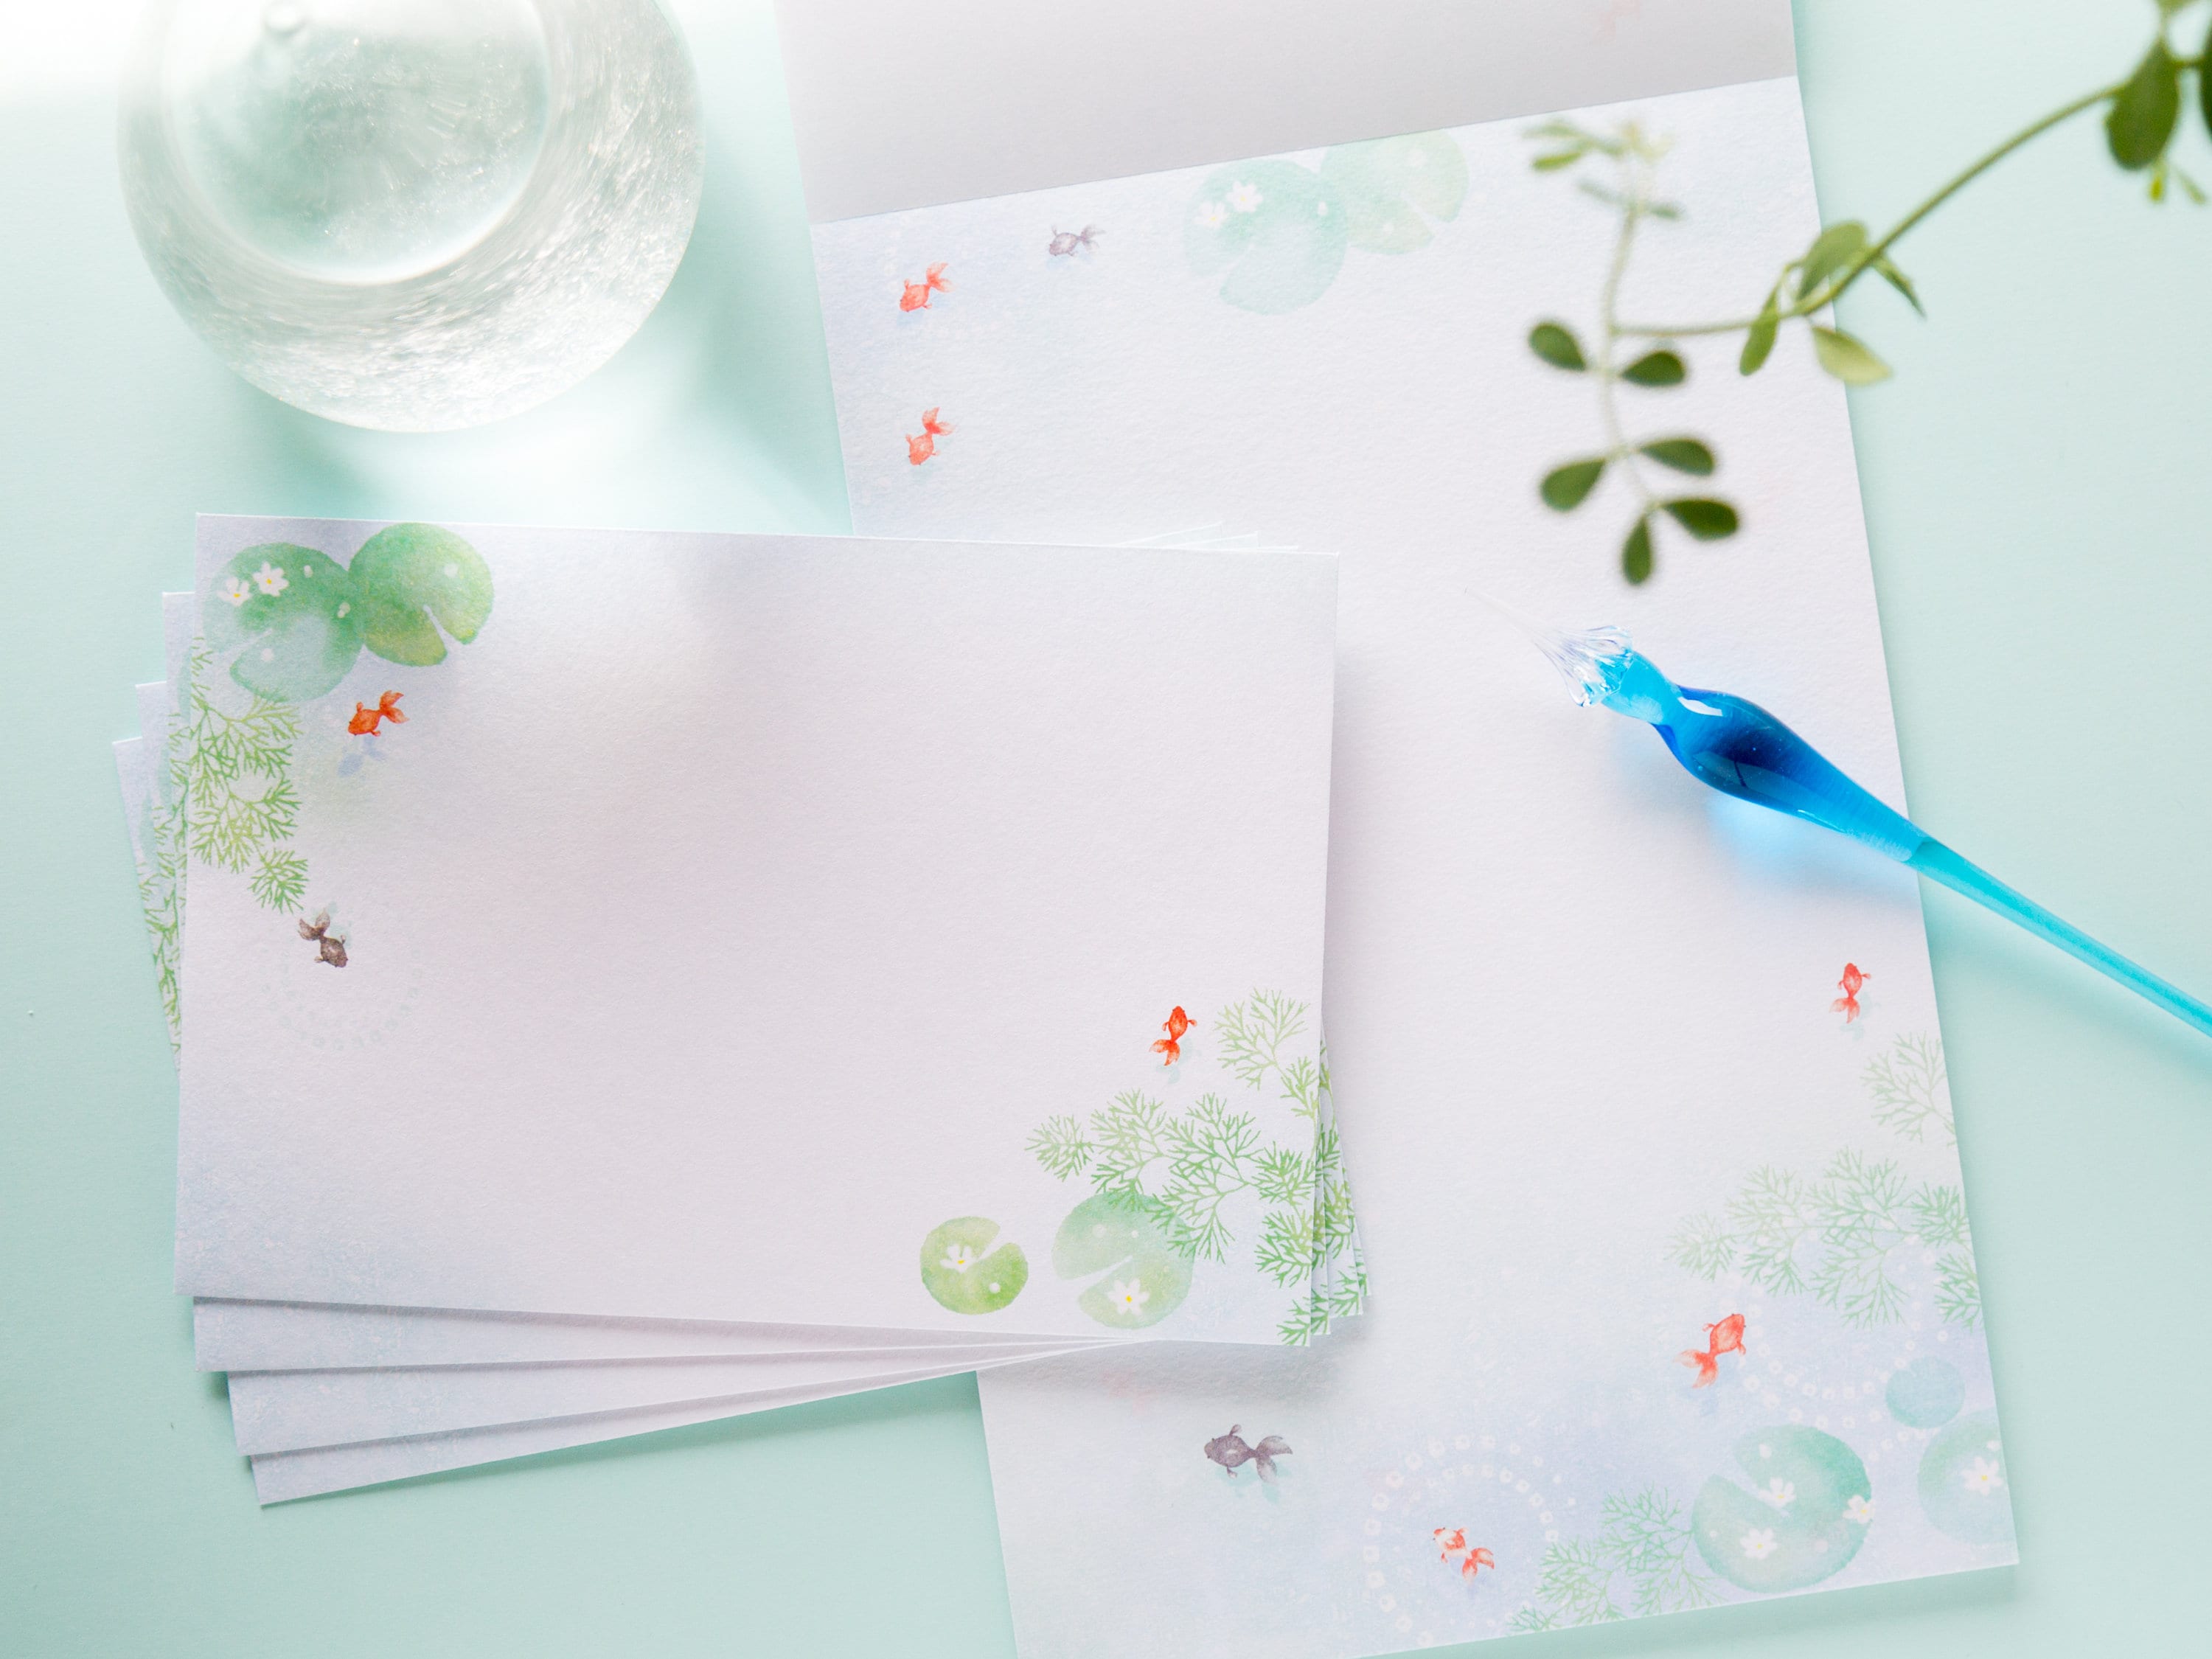 Watercolor Cards with Envelopes Watercolor Cards Blank Watercolor Cards And  Envelopes for Making Watercolor Cards And Envelopes - AliExpress